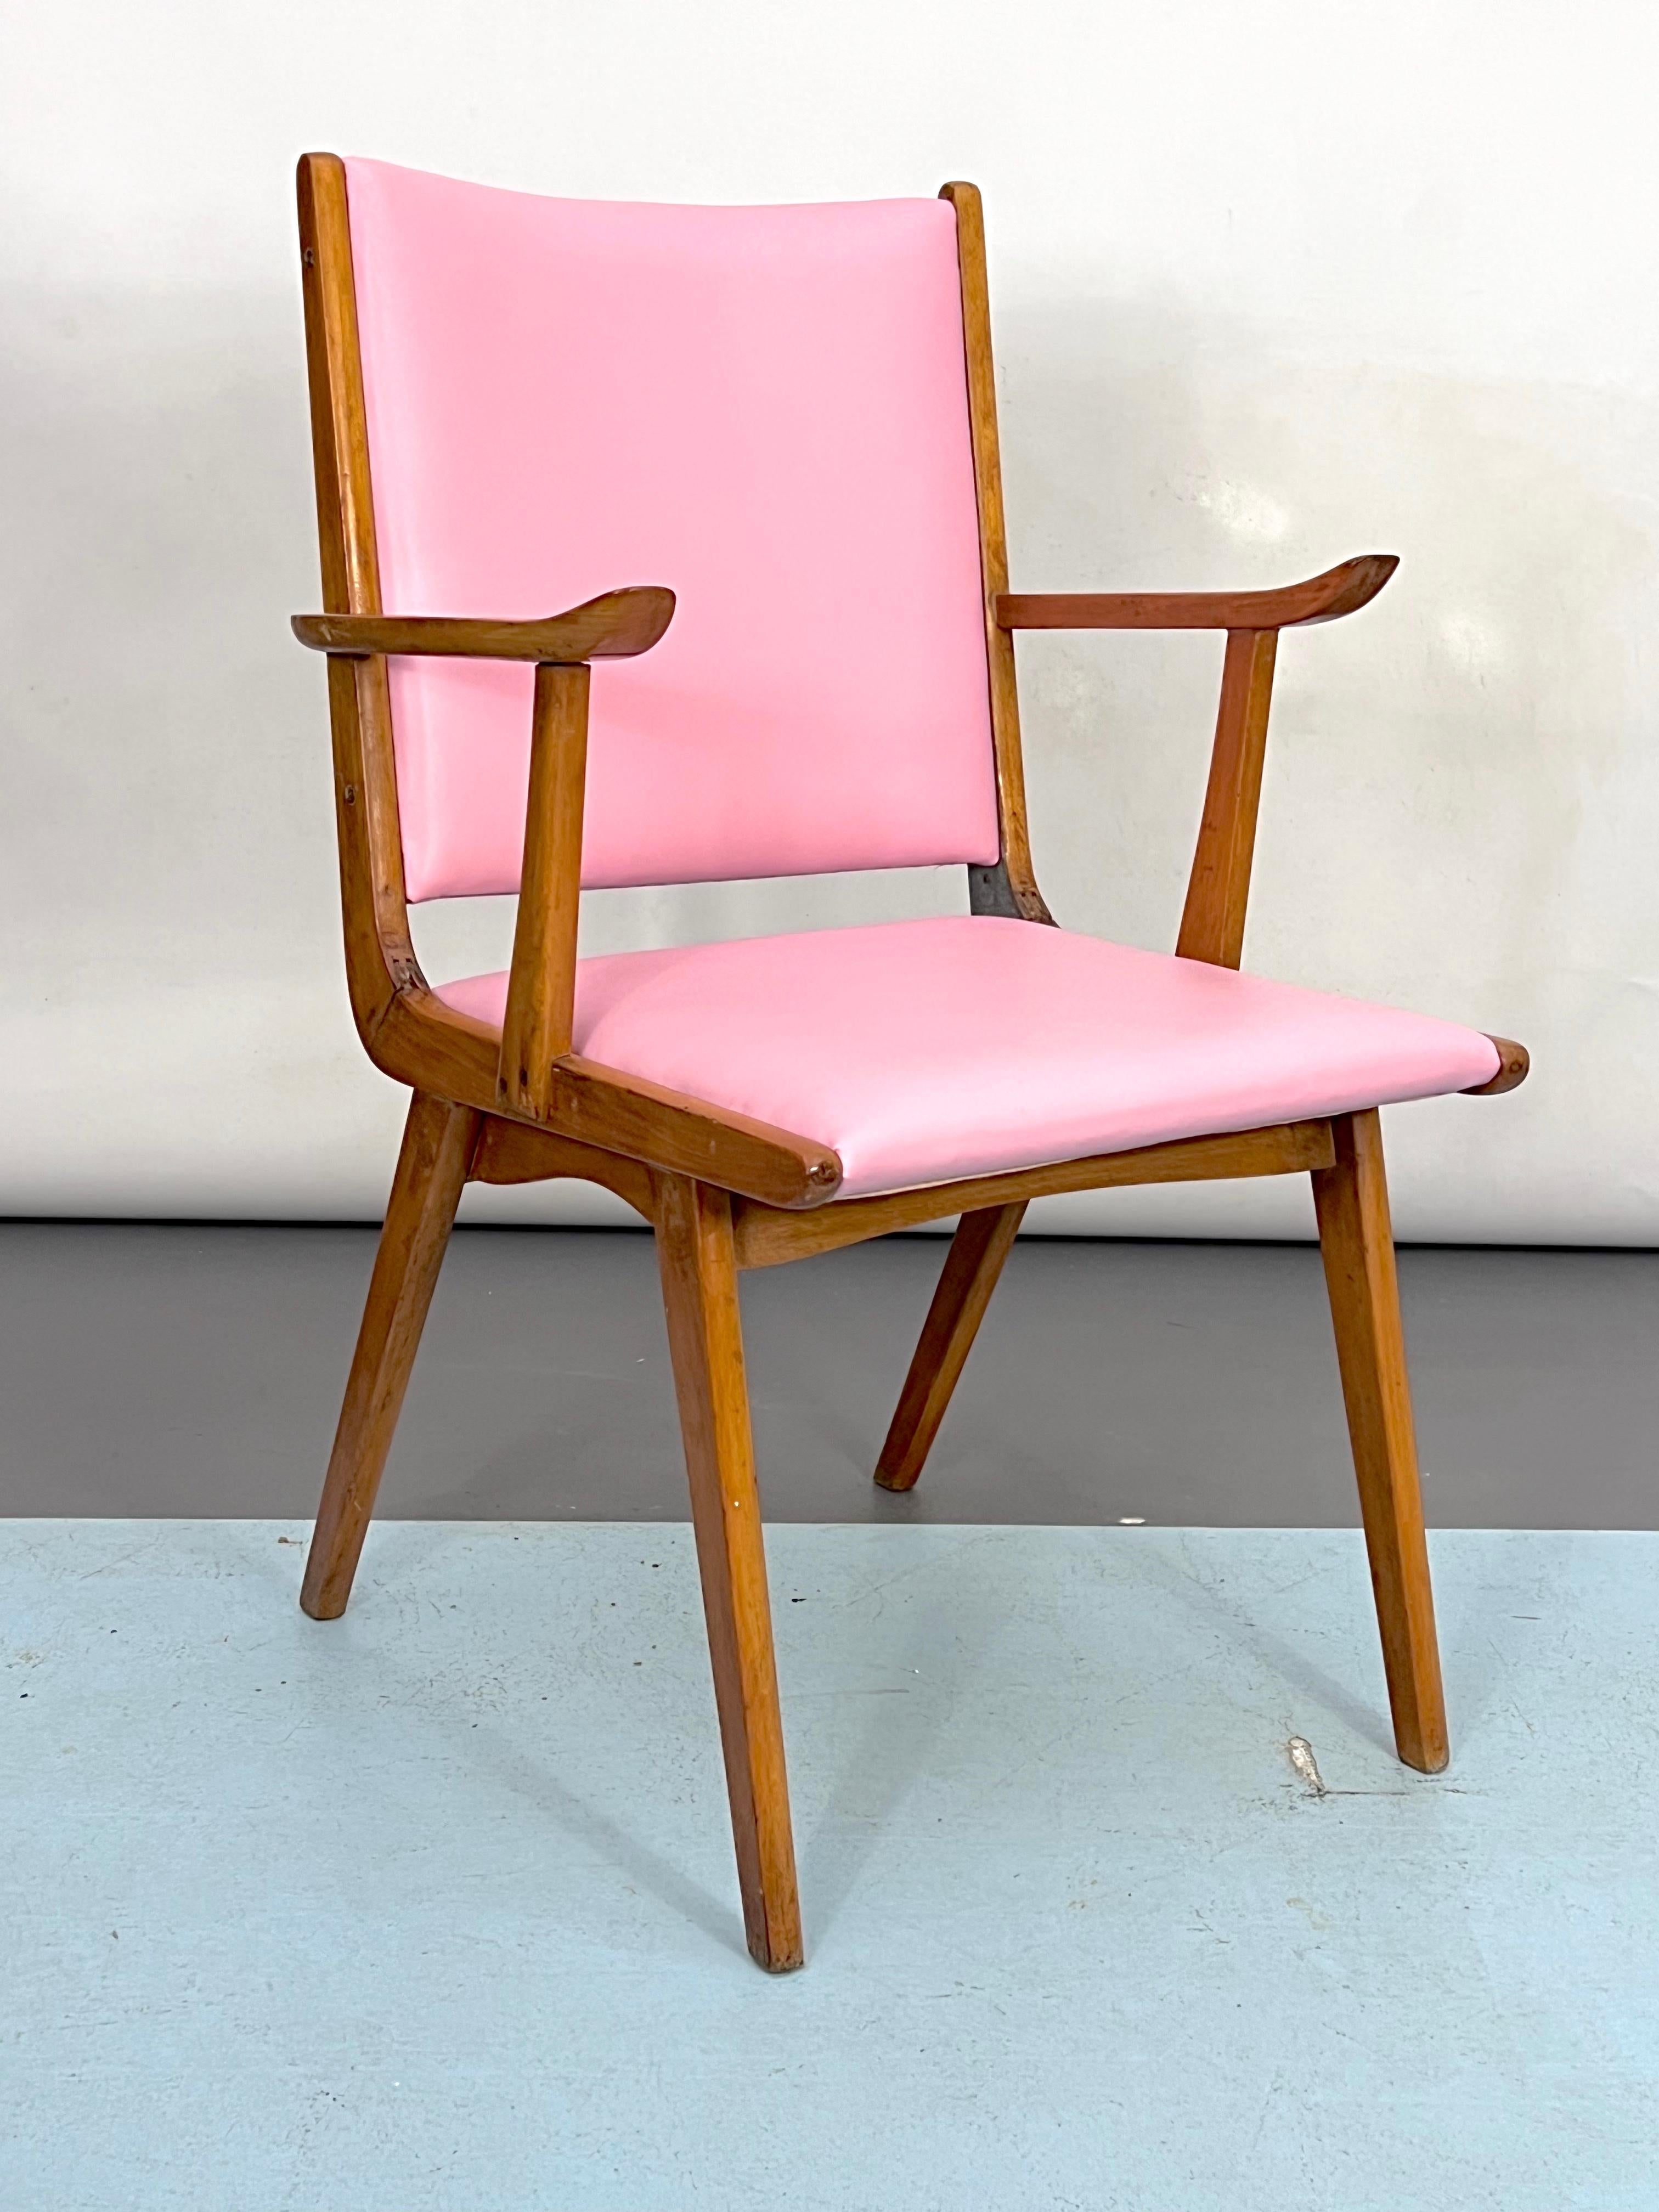 Very good general condition with normal trace of age and use. Re-upholstered in pink smooth leatherette.
 